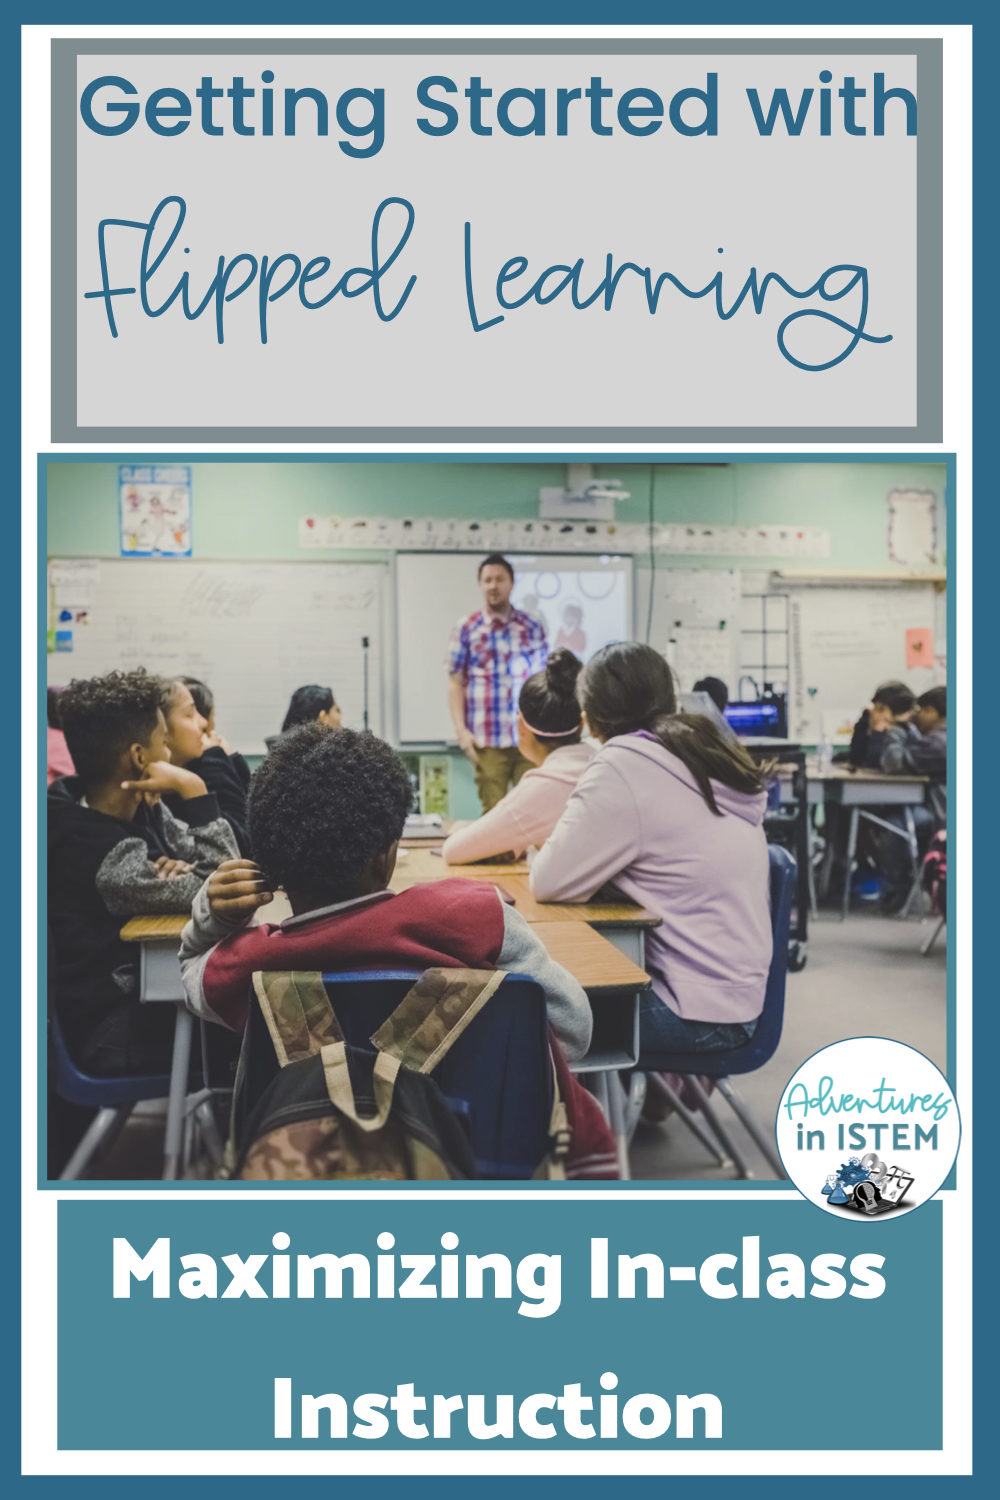 Getting started with the flipped classroom model otherwise known as flipped learning